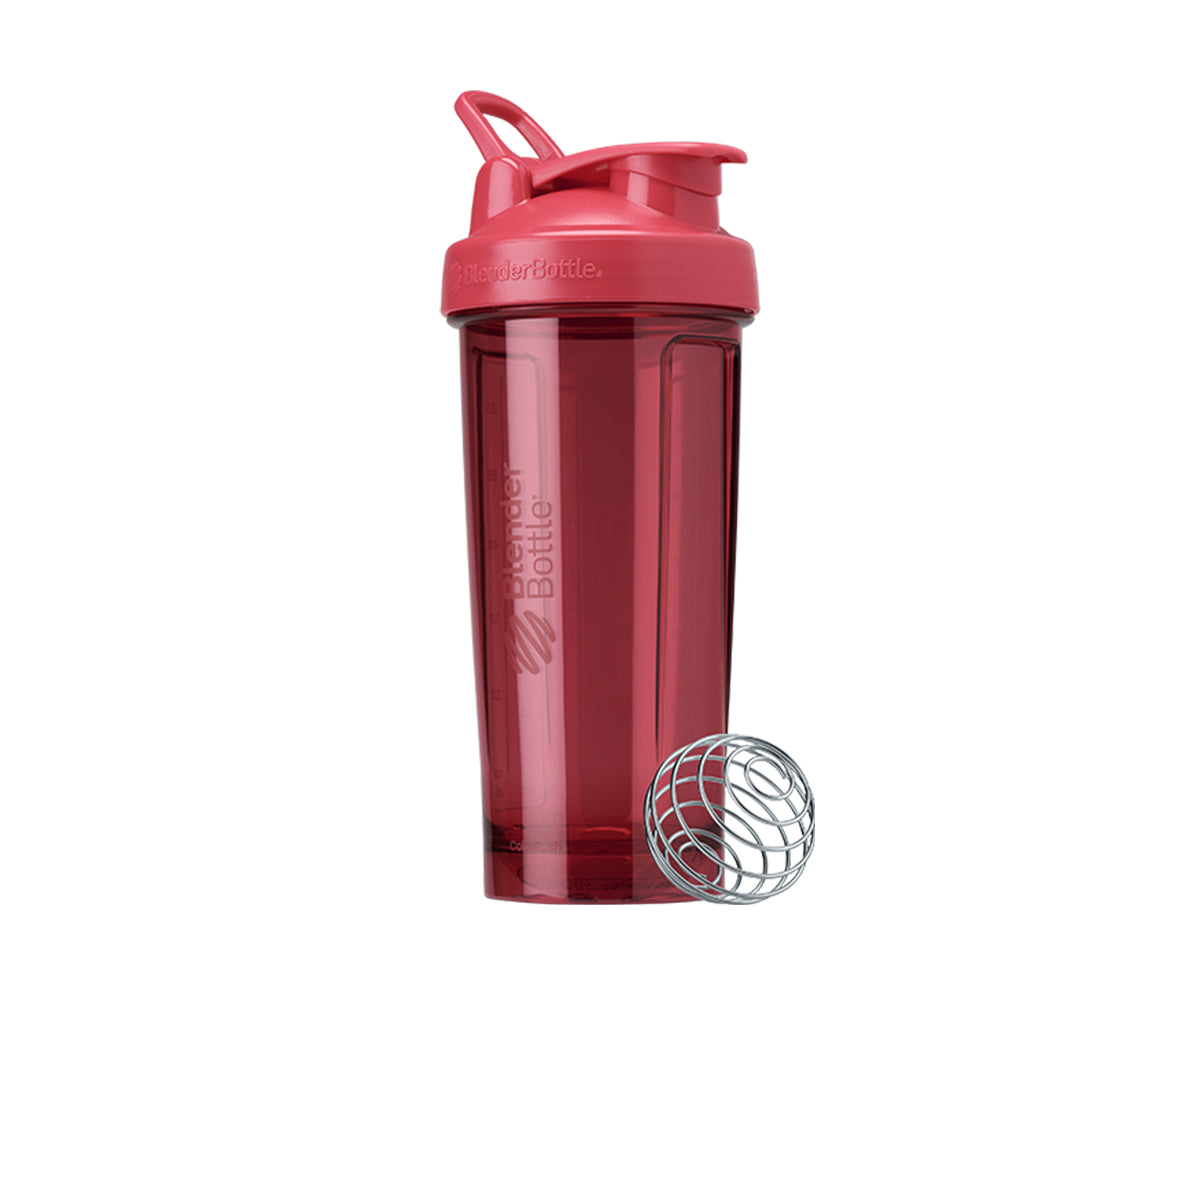 Helimix 2.0 Vortex Blender Shaker Bottle 28oz Capacity | No Blending Ball  or Whisk | USA Made | Portable Pre Workout Whey Protein Drink Shaker Cup |  Mixes Cocktails Smoothies Shakes | Dishwasher Safe - Walmart.com